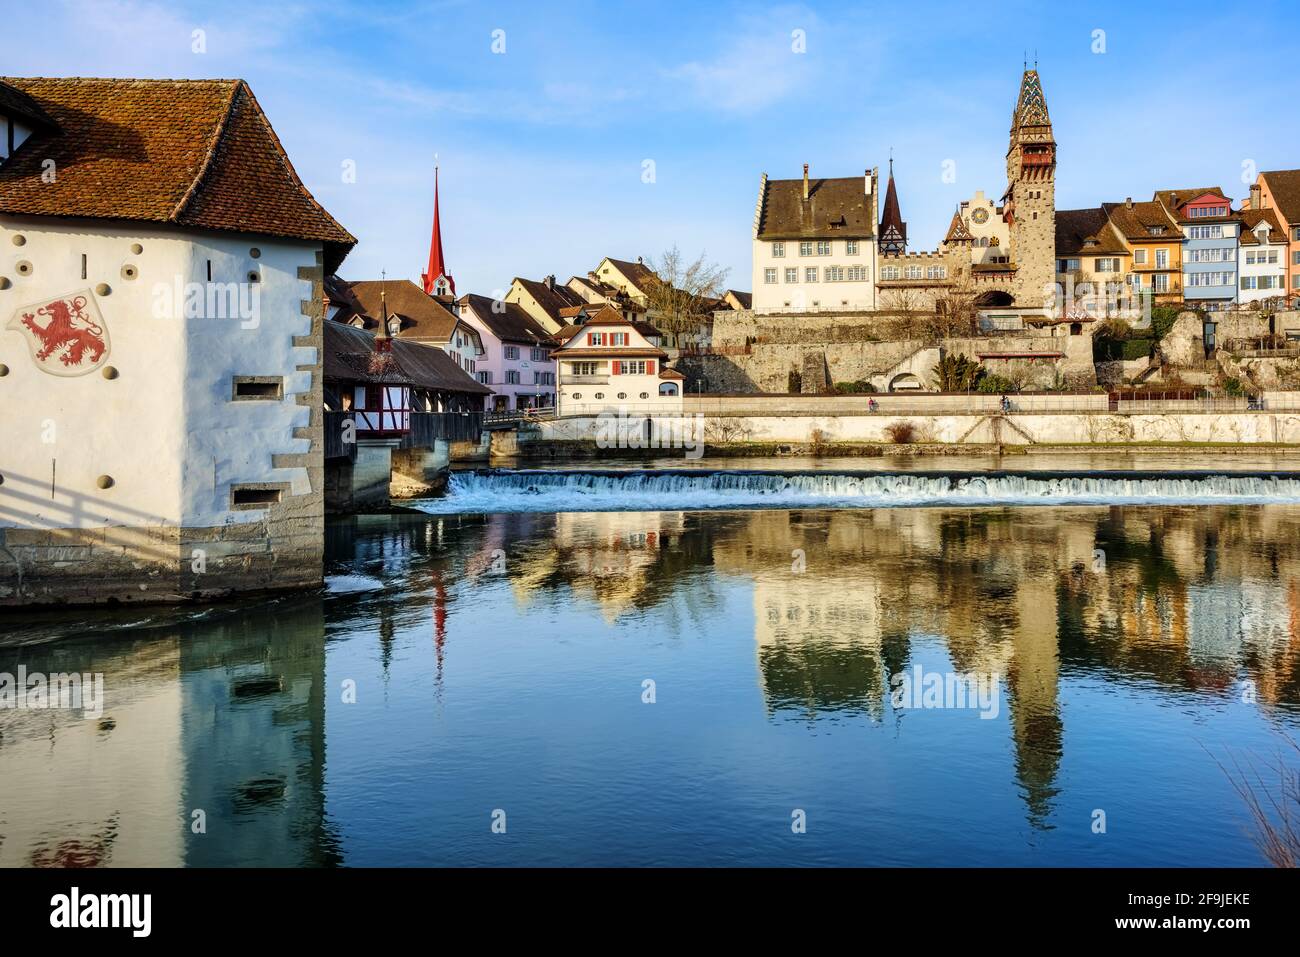 Bremgarten historical Old town on Reuss river, Aargau canton, Switzerland, is a popular one day trip destination from Zurich Stock Photo